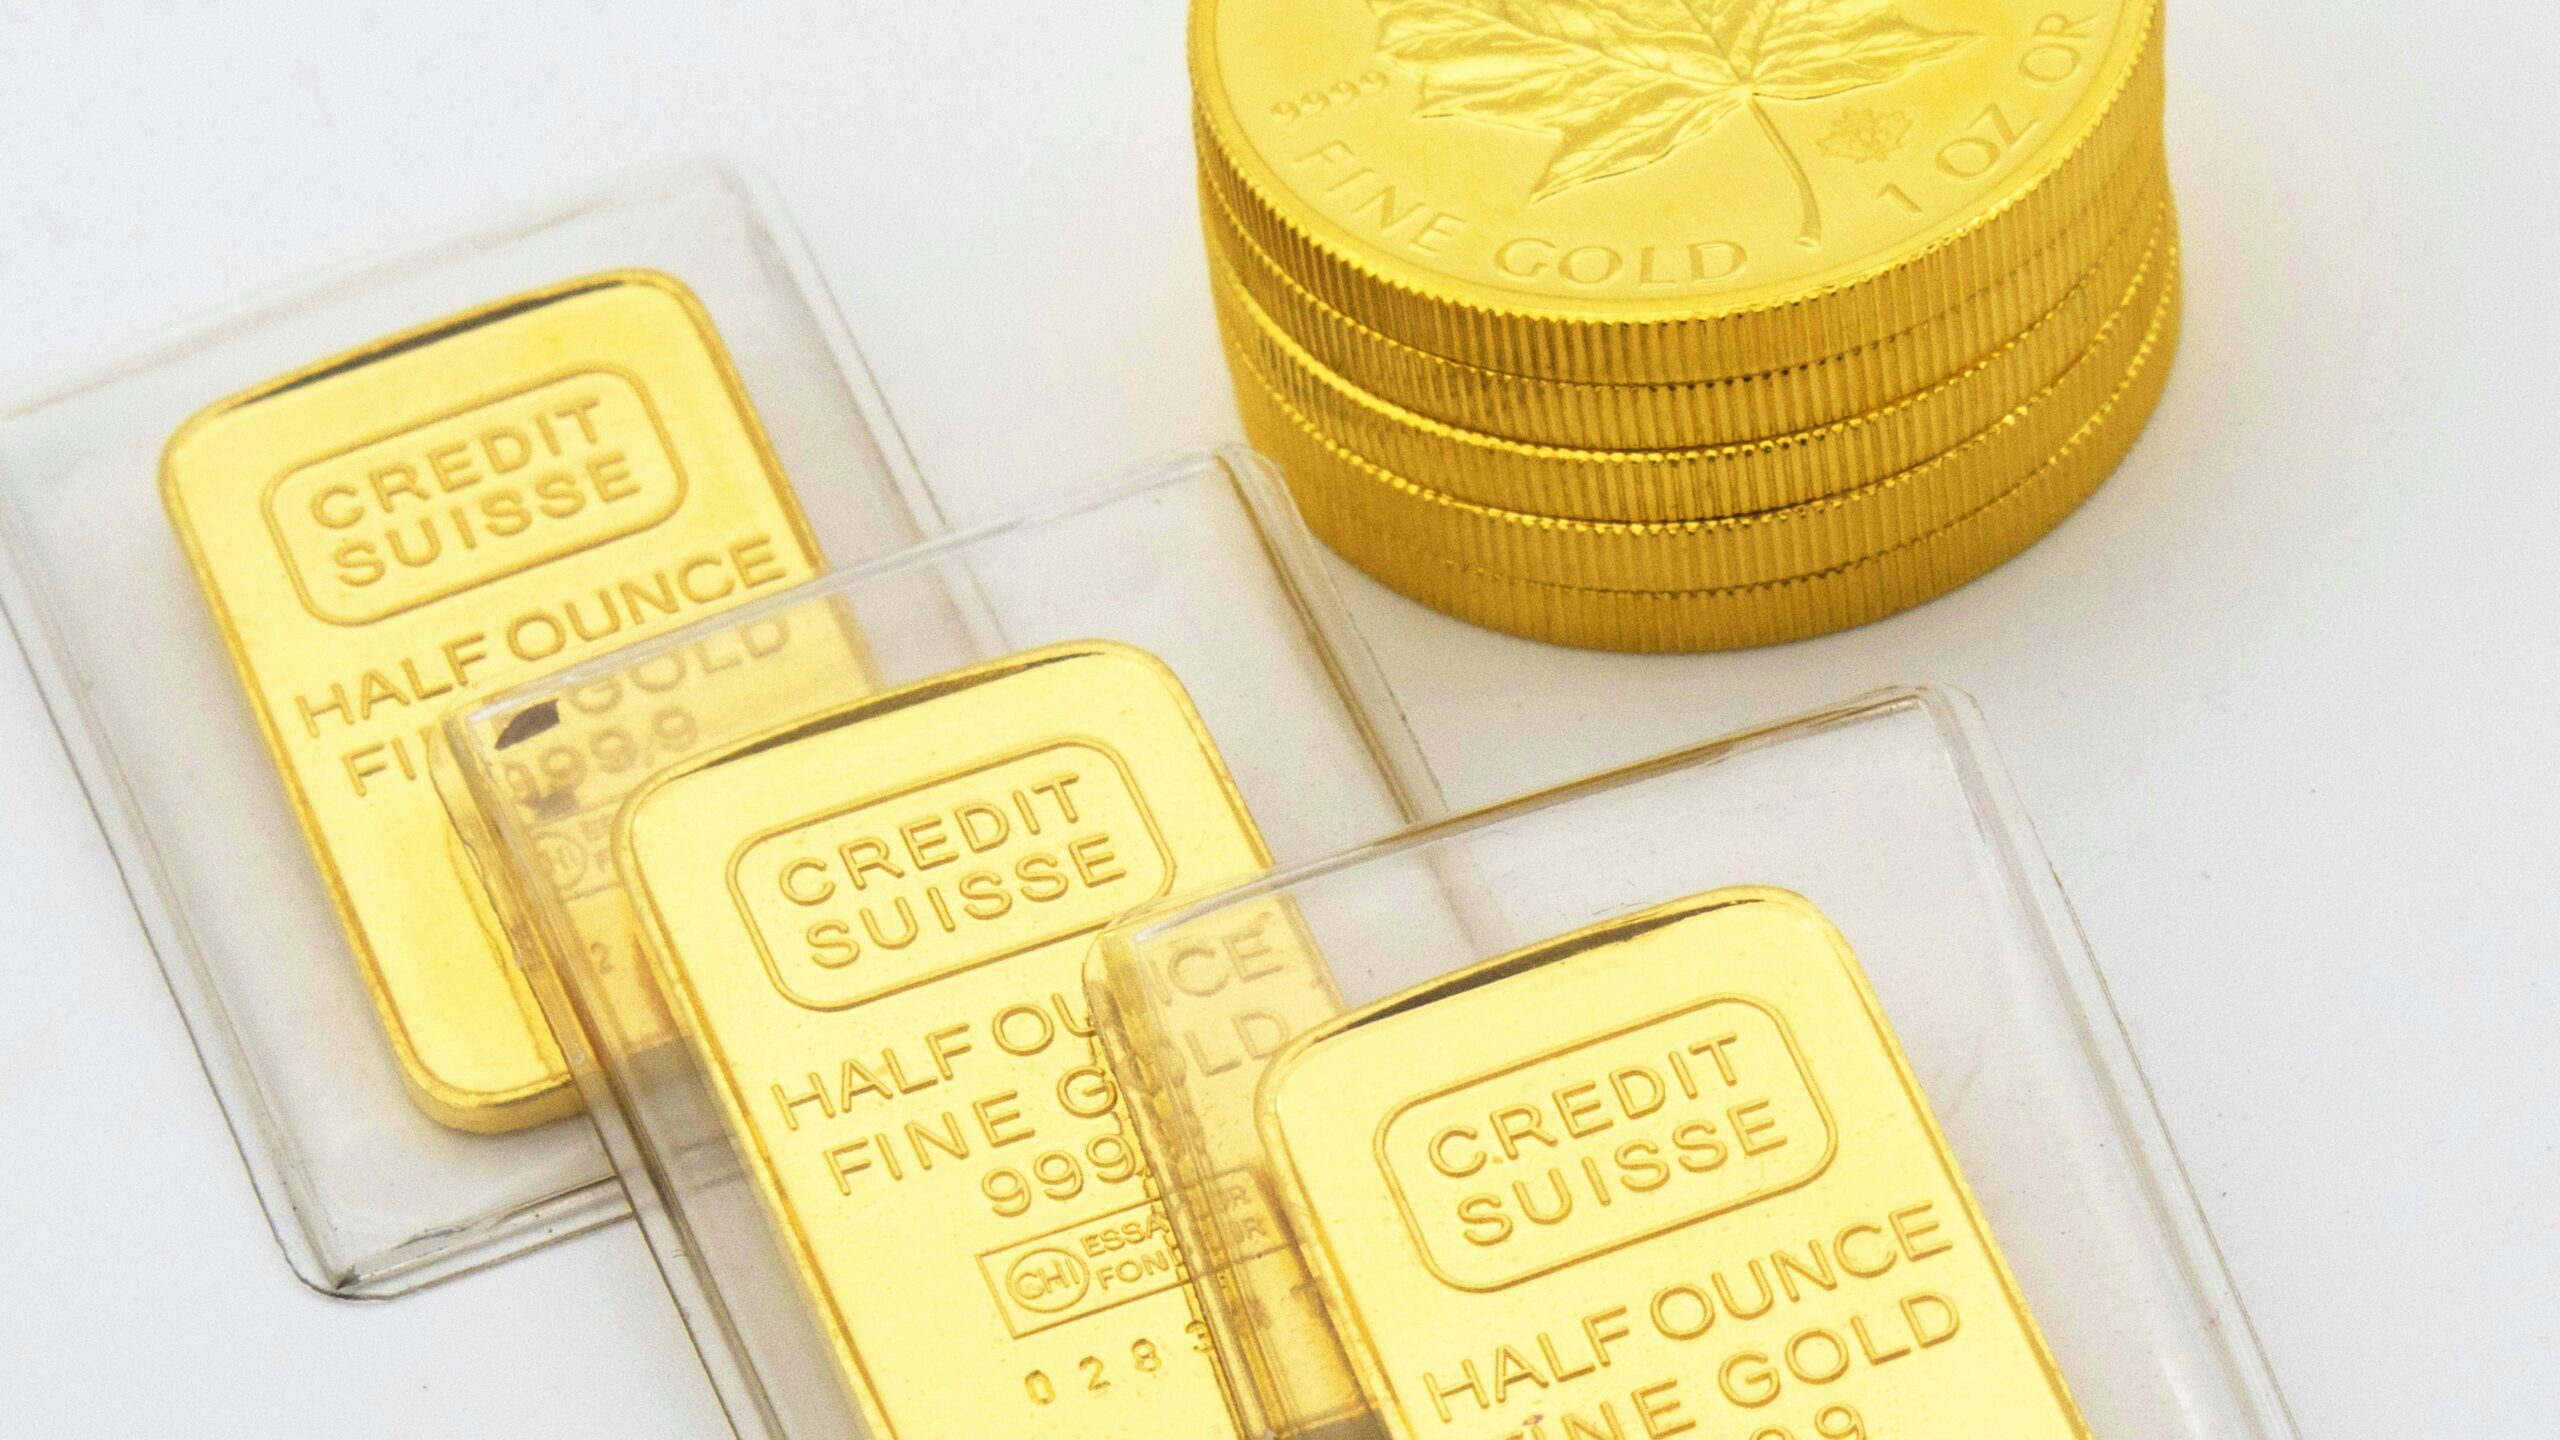 Goldco gold ira rollover